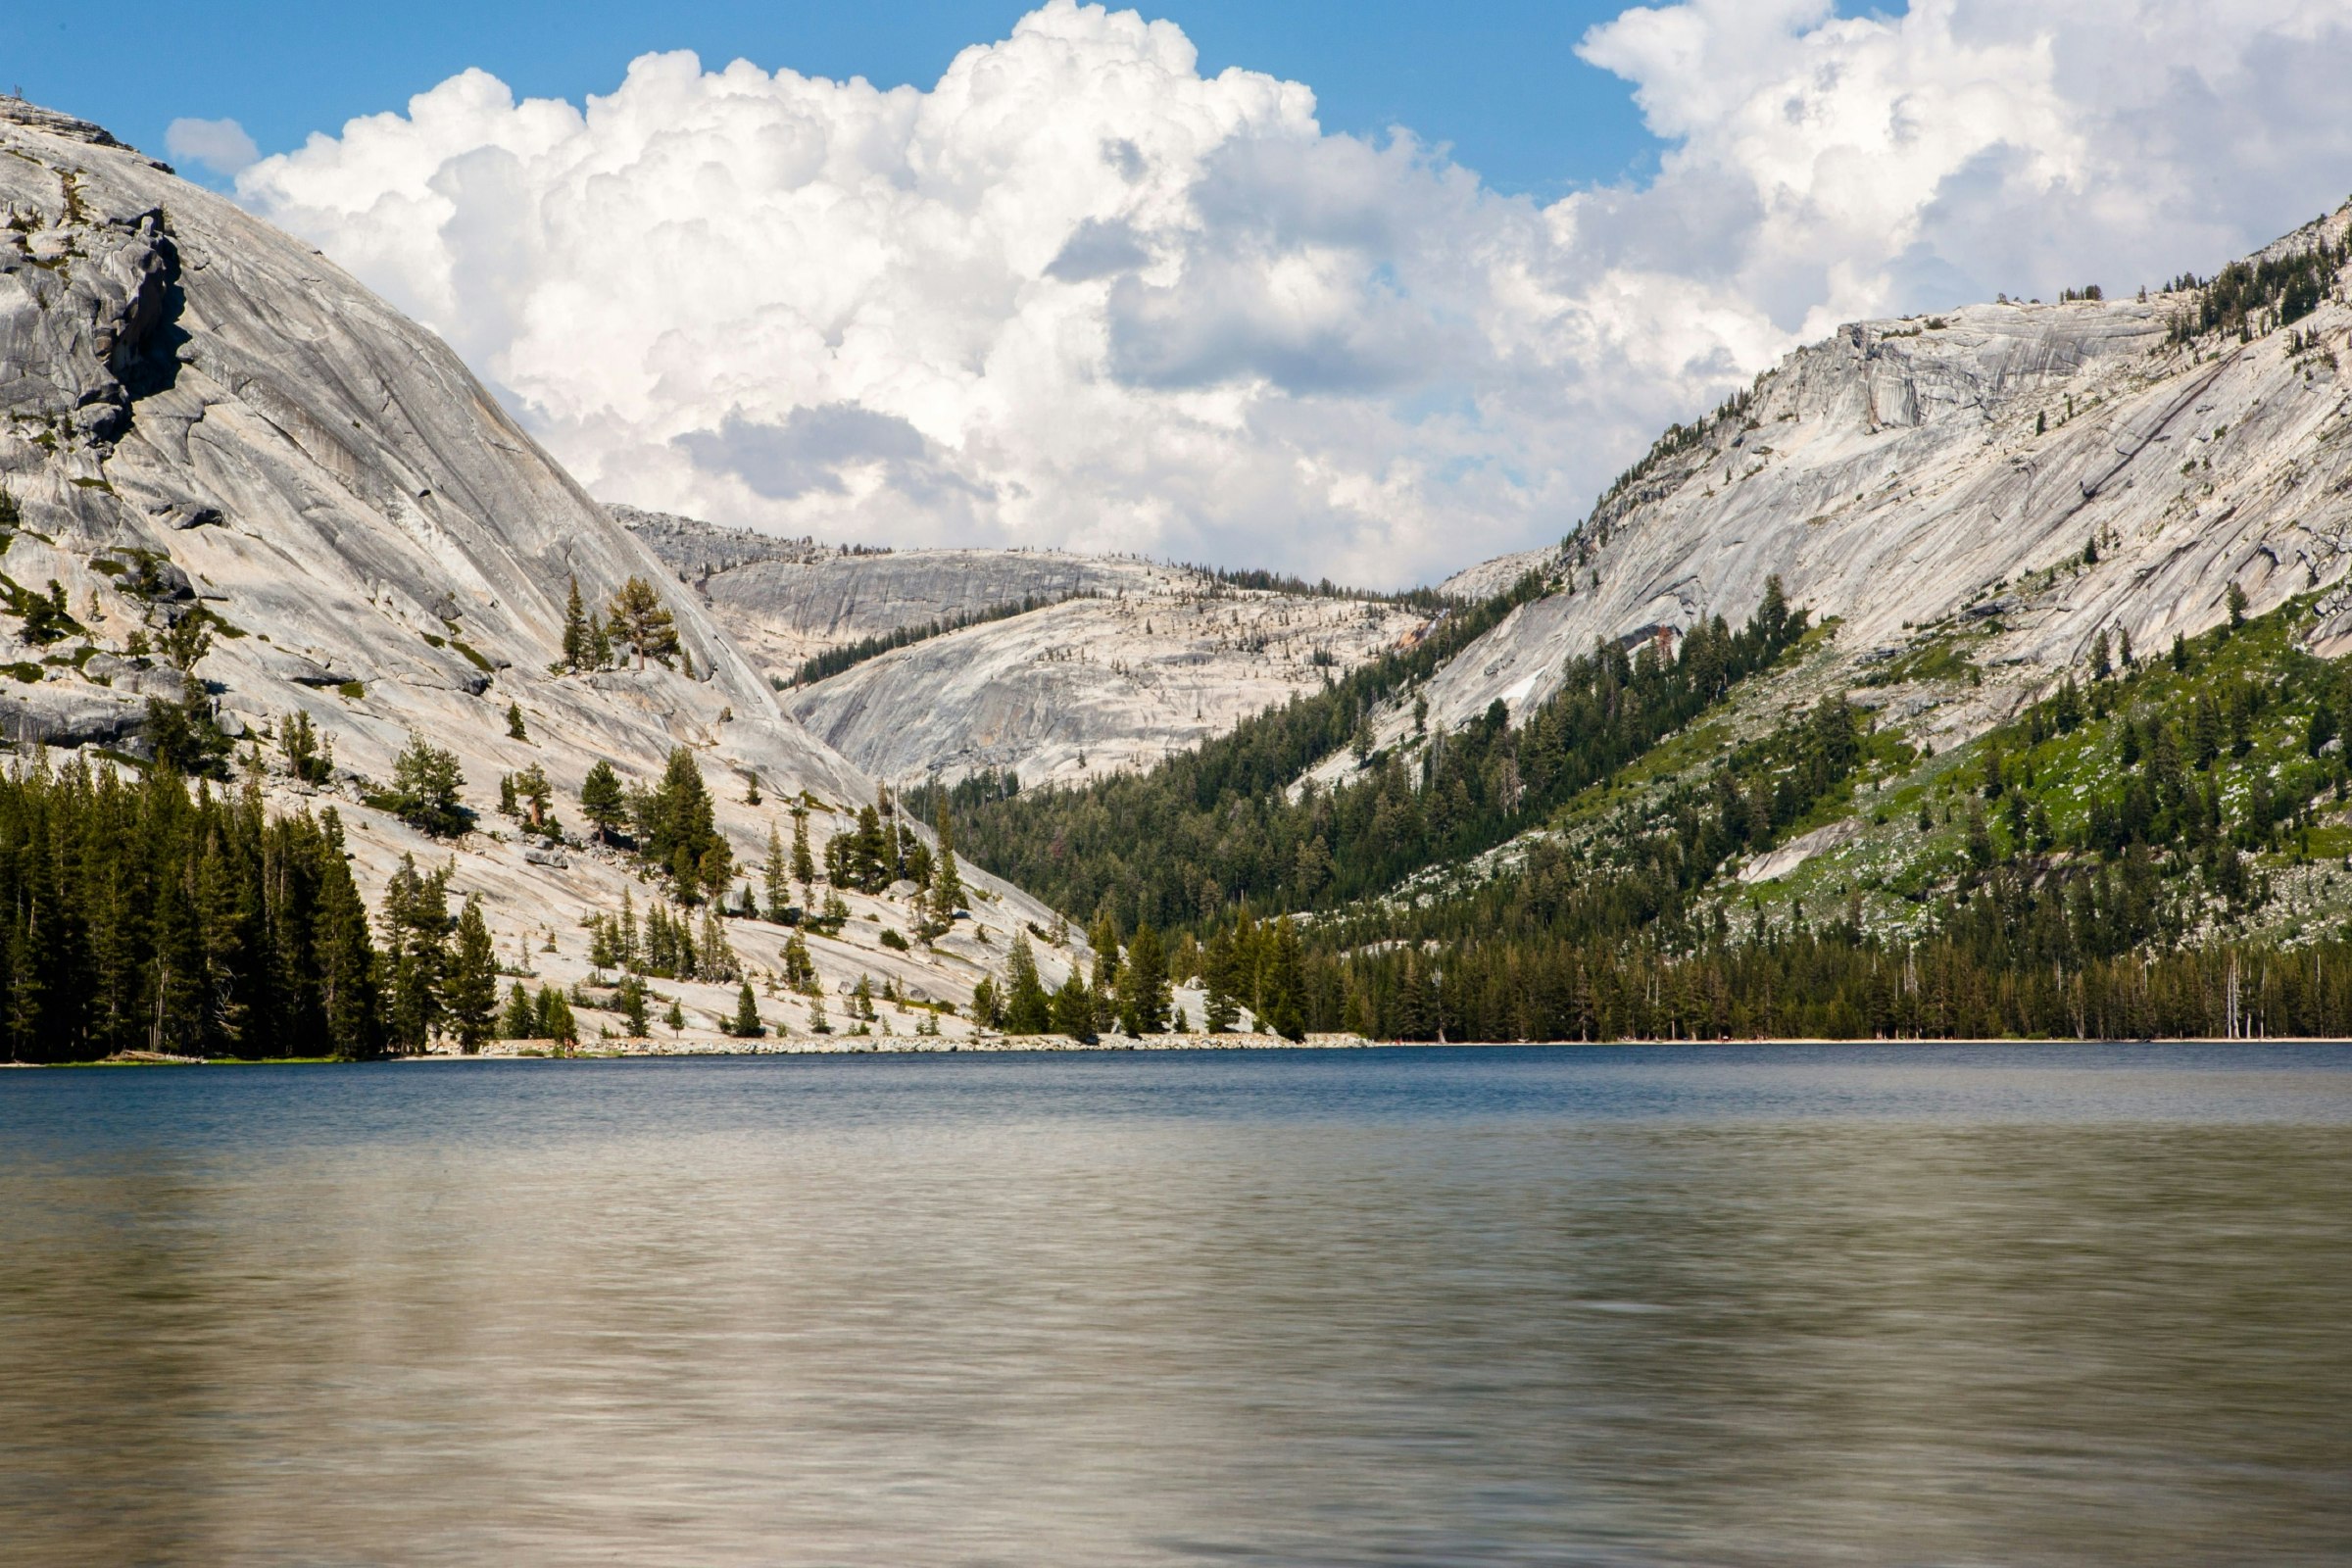 Cathedral Lake and surrounding mountains in Yosemite National Park. 